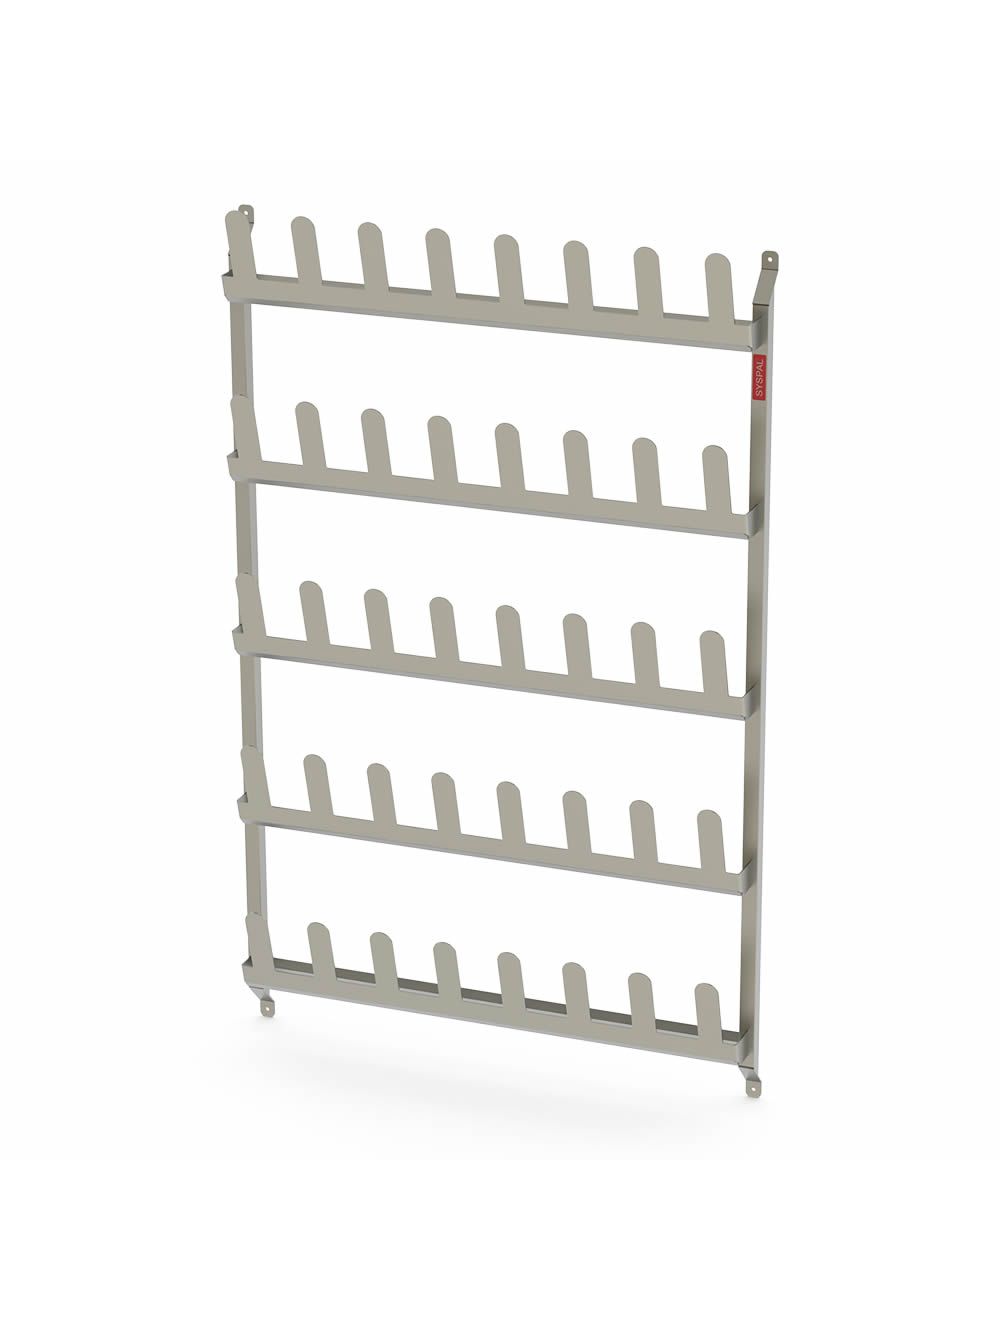 Stainless steel wall mounted shoe rack